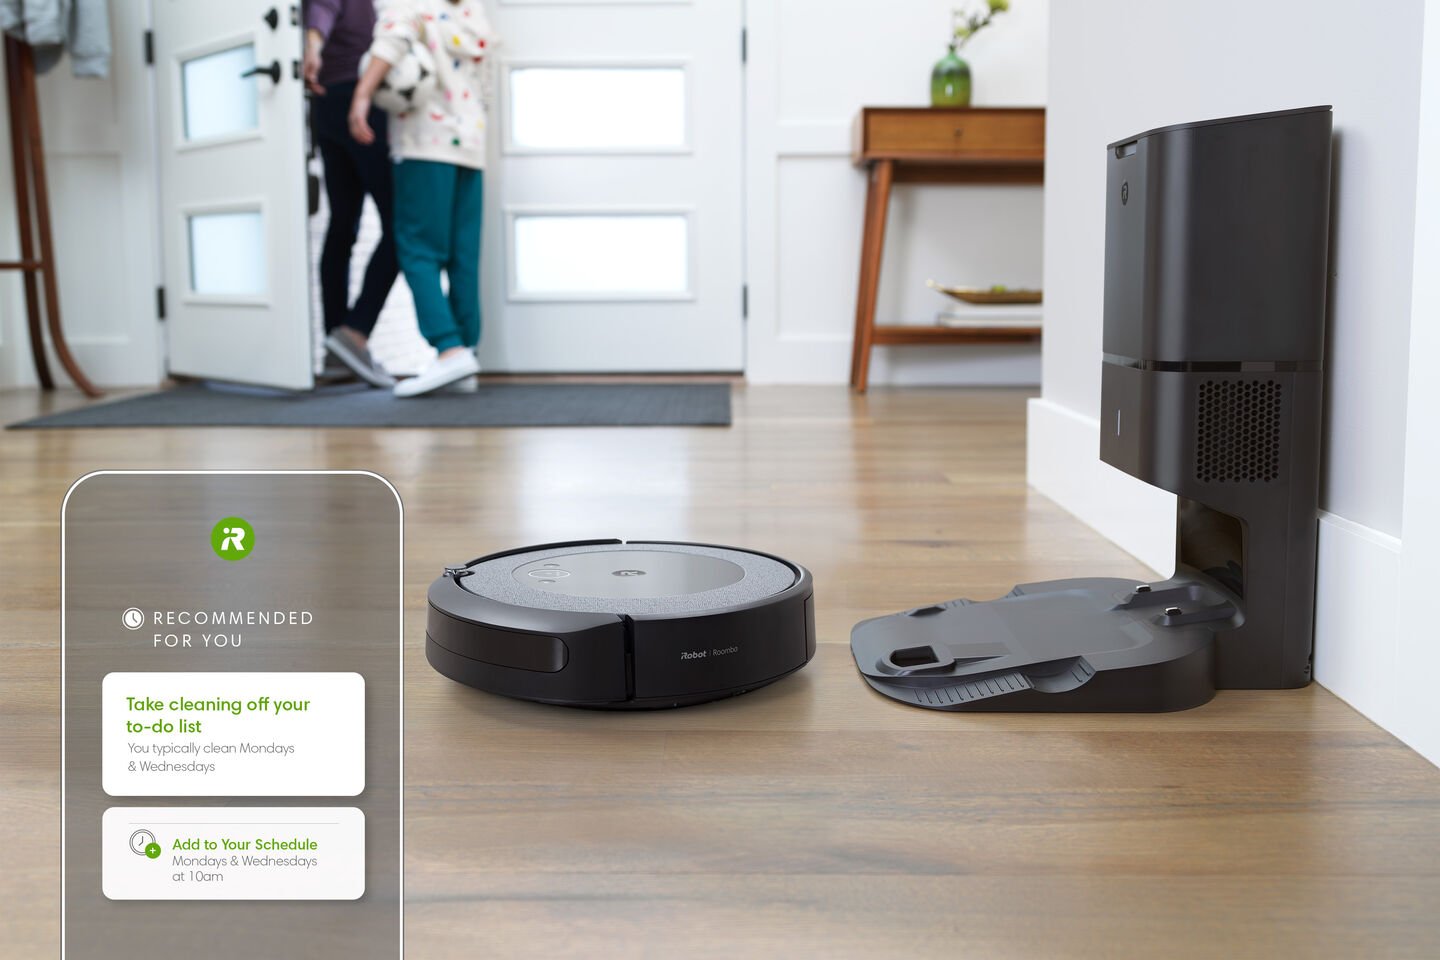 How to Get Roomba to Clean Whole House 